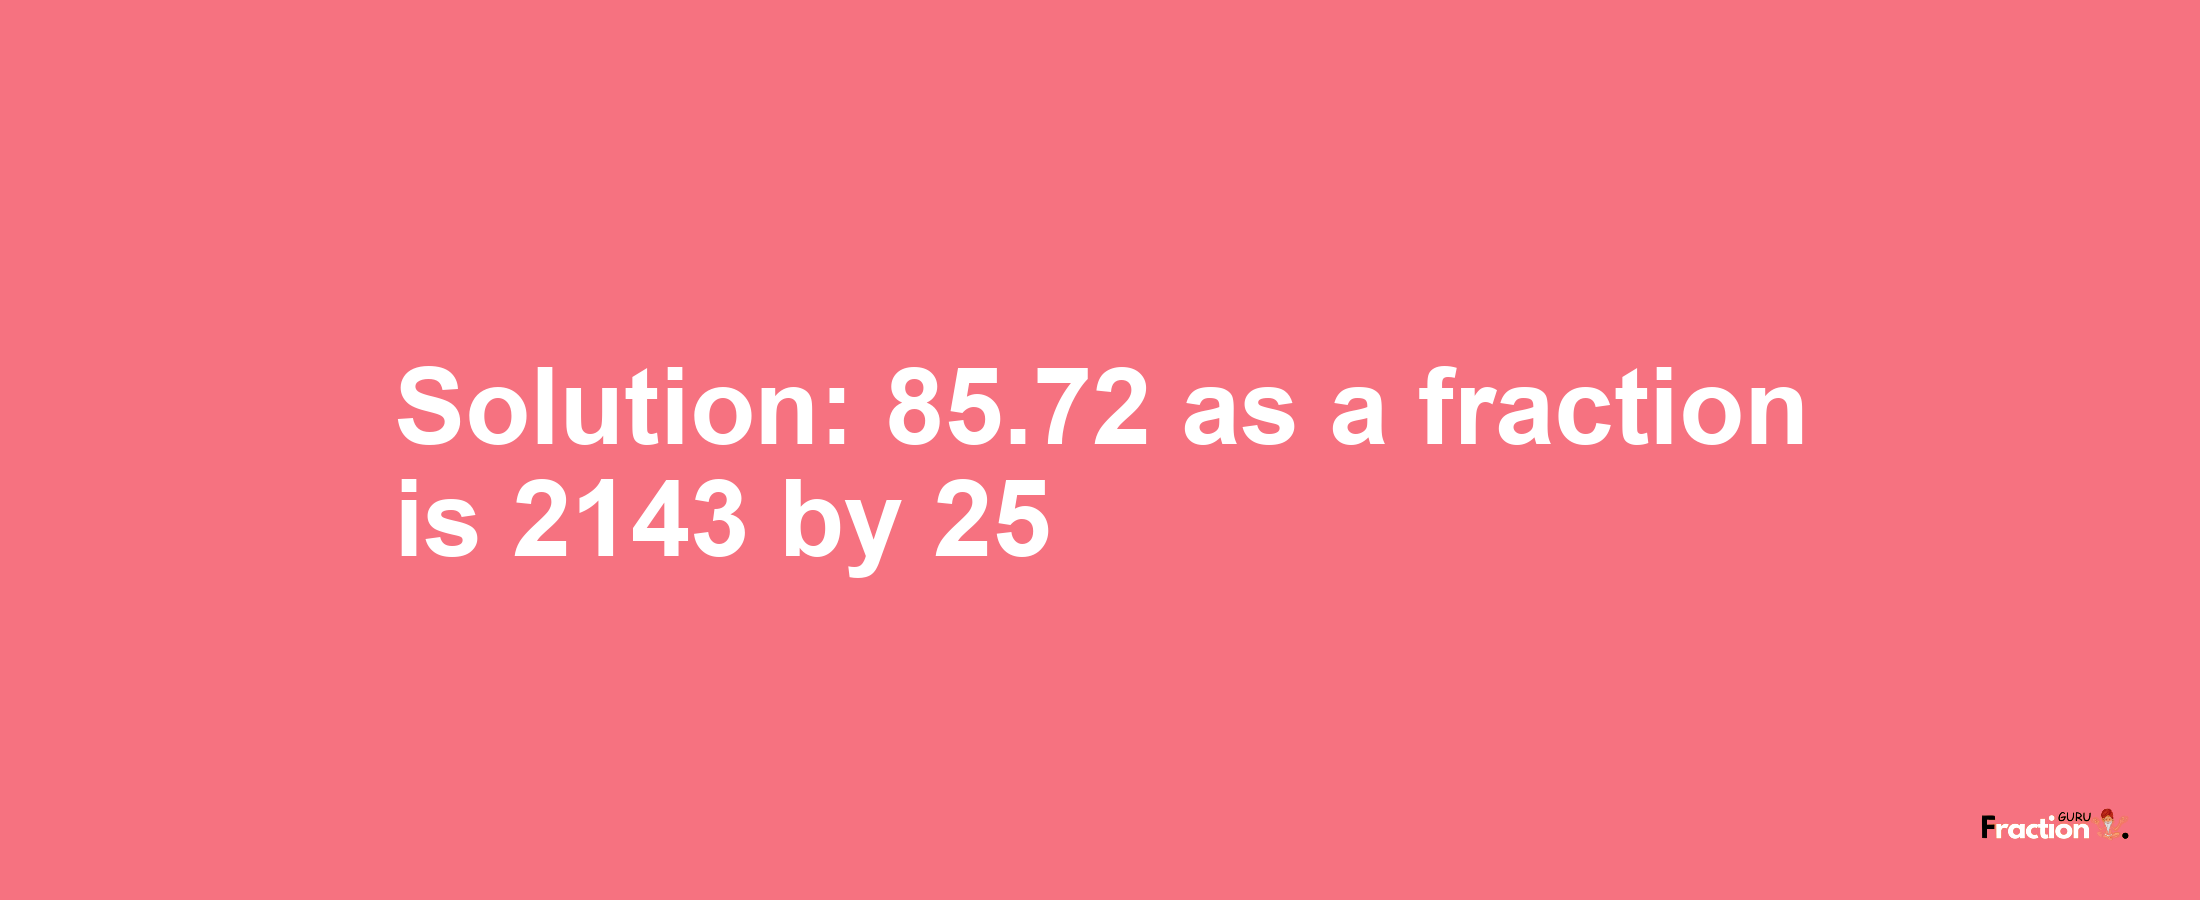 Solution:85.72 as a fraction is 2143/25